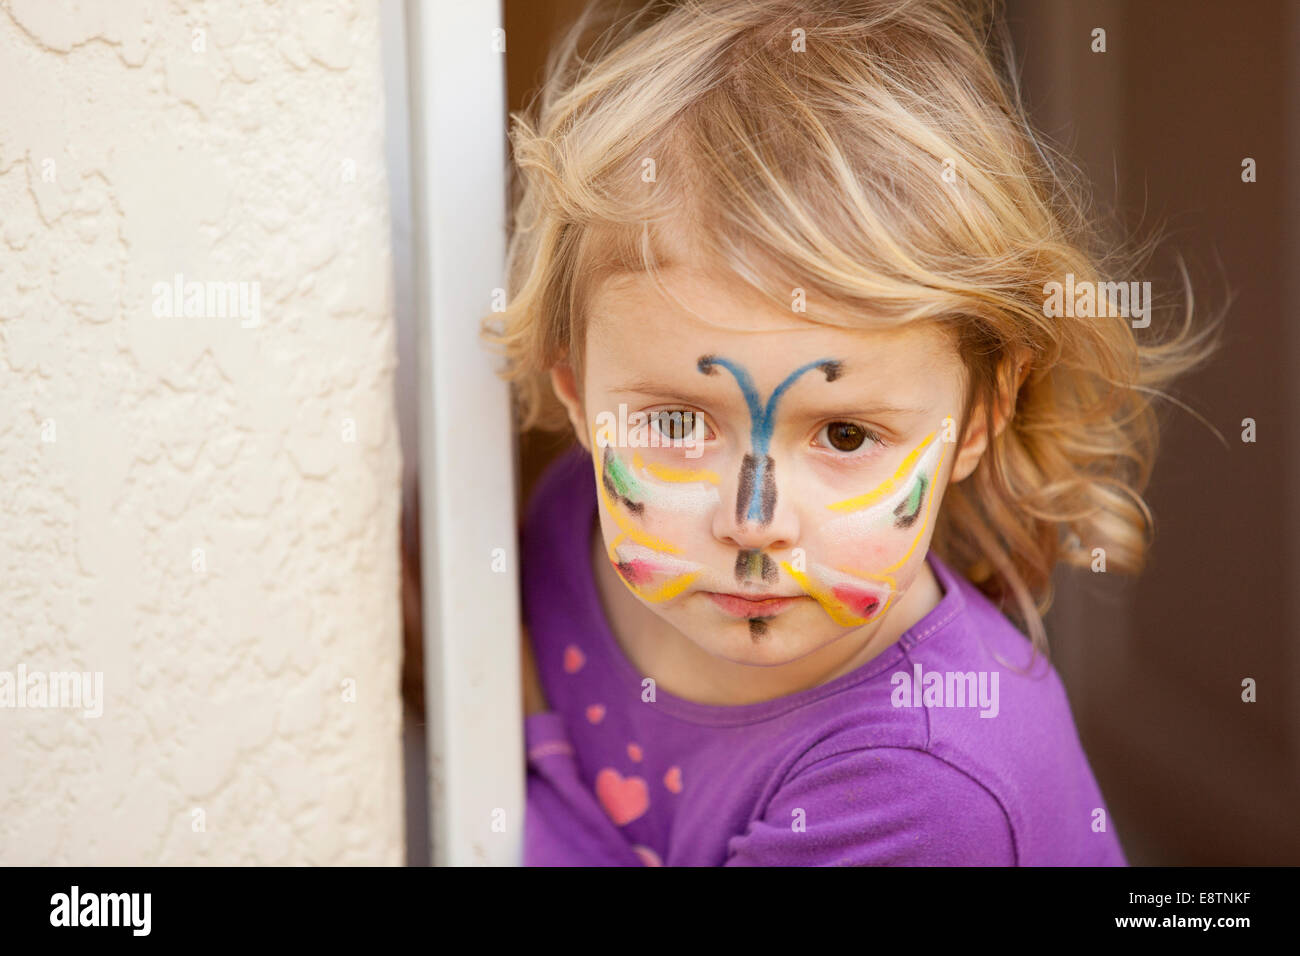 Girl with butterfly face paint. Stock Photo